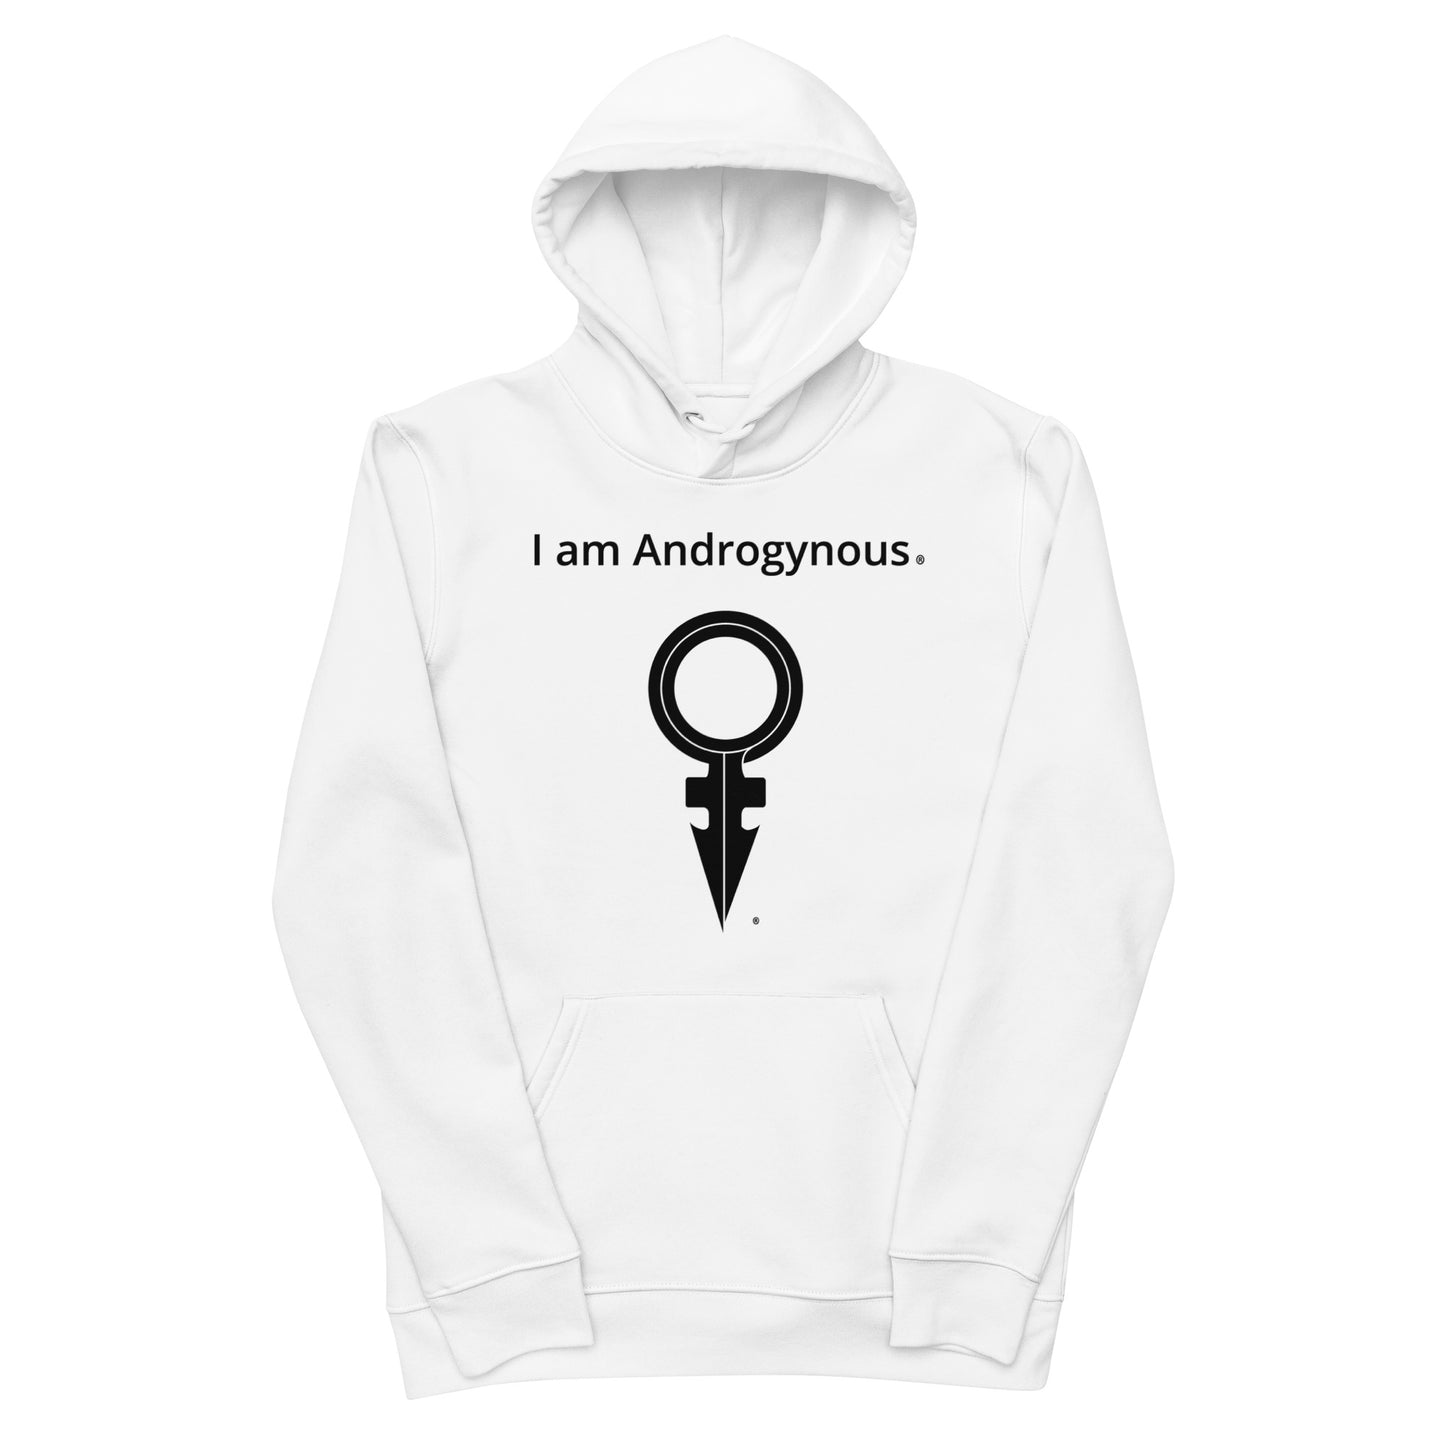 I AM ANDROGYNOUS + SYMBOL BLACK ON WHITE PRINTED RINGSPUN Unisex essential eco hoodie